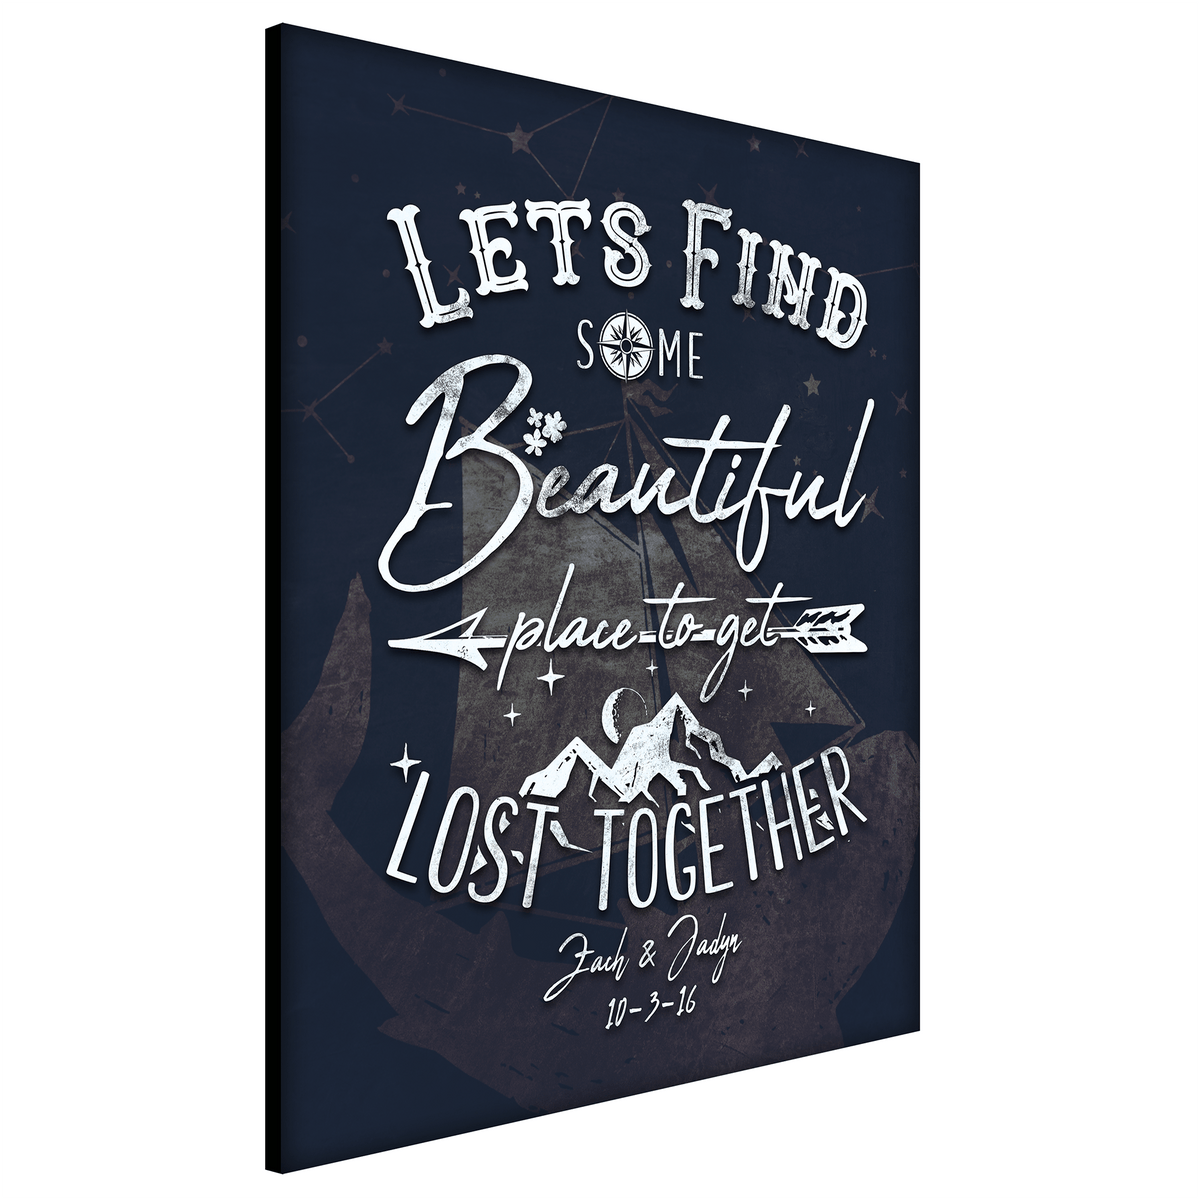 Wall Decor with quote - Lets find some beautiful place to get lost together